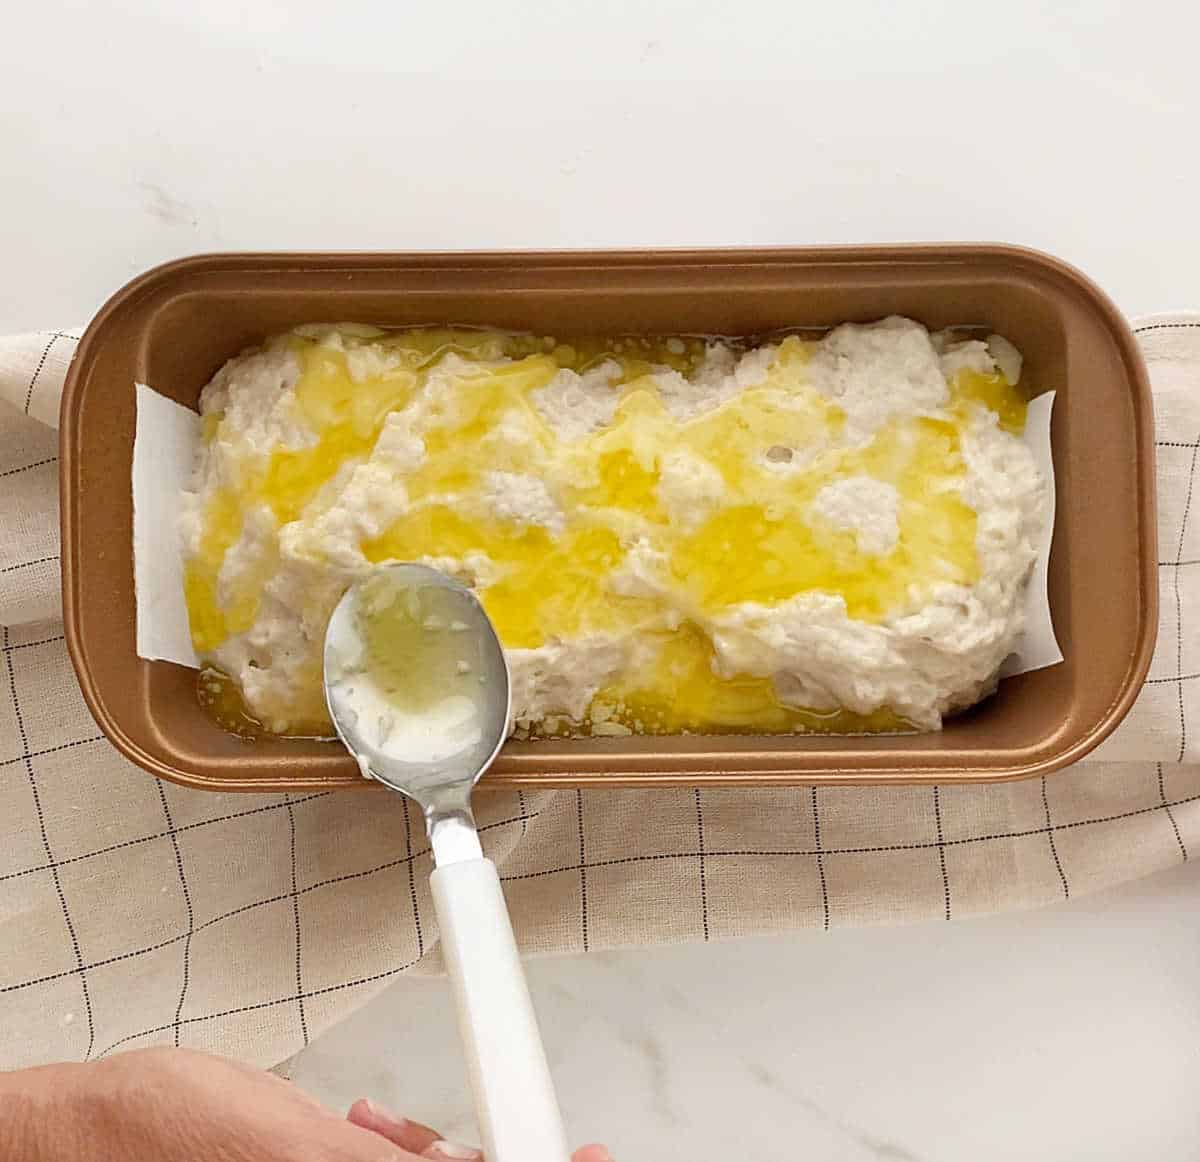 Melted butter being added with a spoon to beer bread batter in a copper loaf pan set on a beige towel. White marble surface.